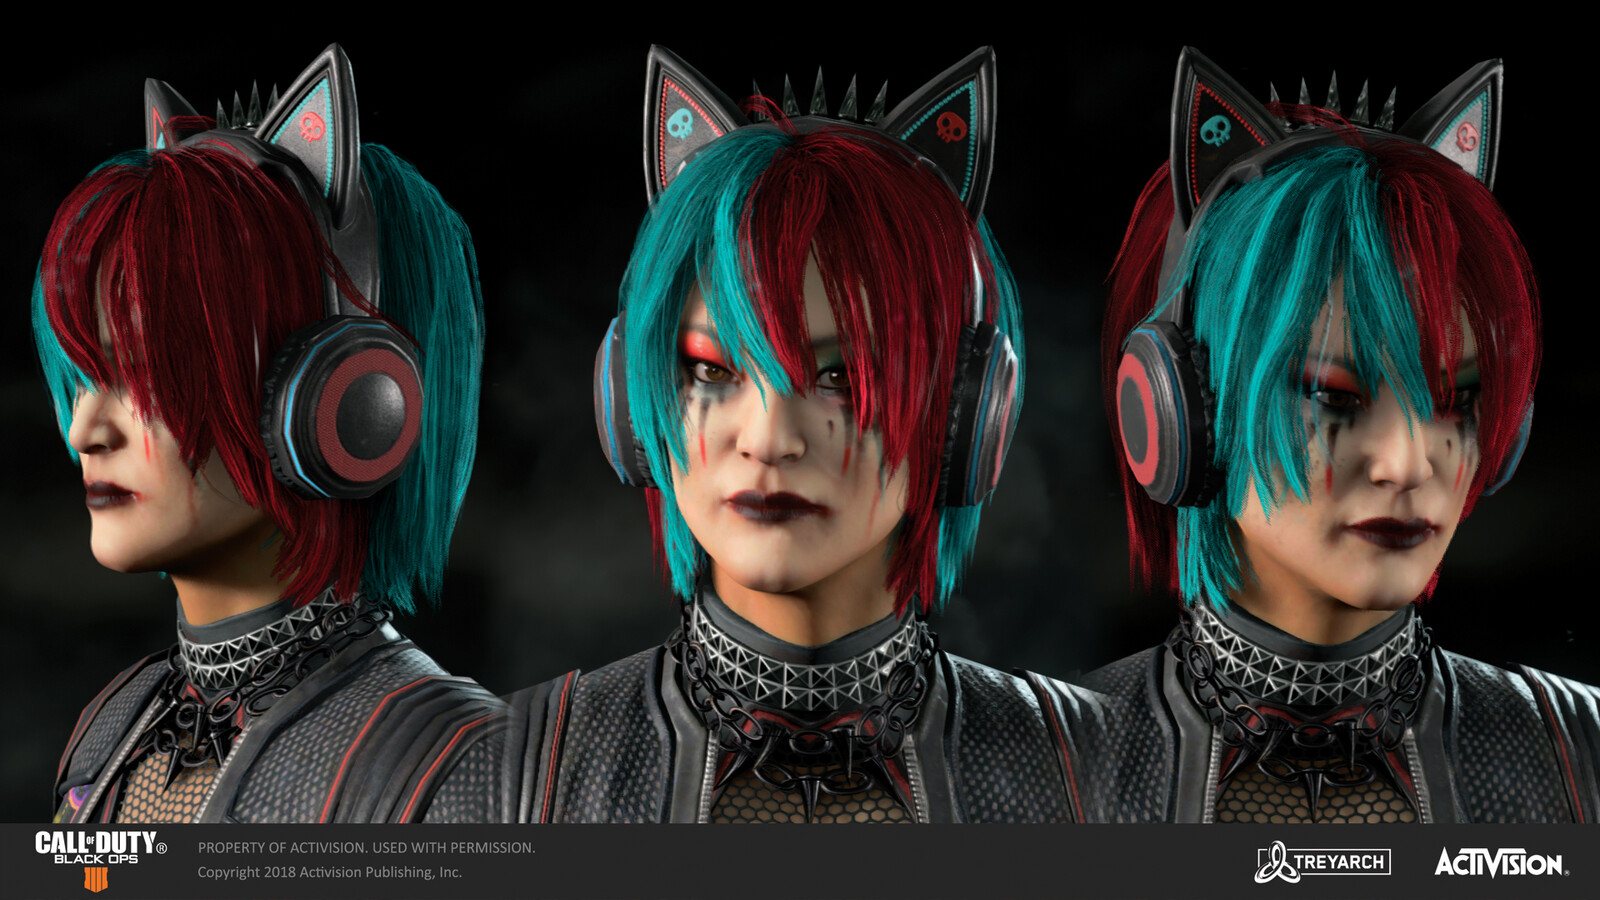 Textured Seraph's warpaint for her 'Kitty Six' skin in the 'Dark Divide' DLC. Body model made by our external partners at RedHotCG, cyberarm modeled by Yaw Chang,  hair by Jason Anh, and the head was sculpted by Anh Nguyen. Costume designed by Yangtian Li